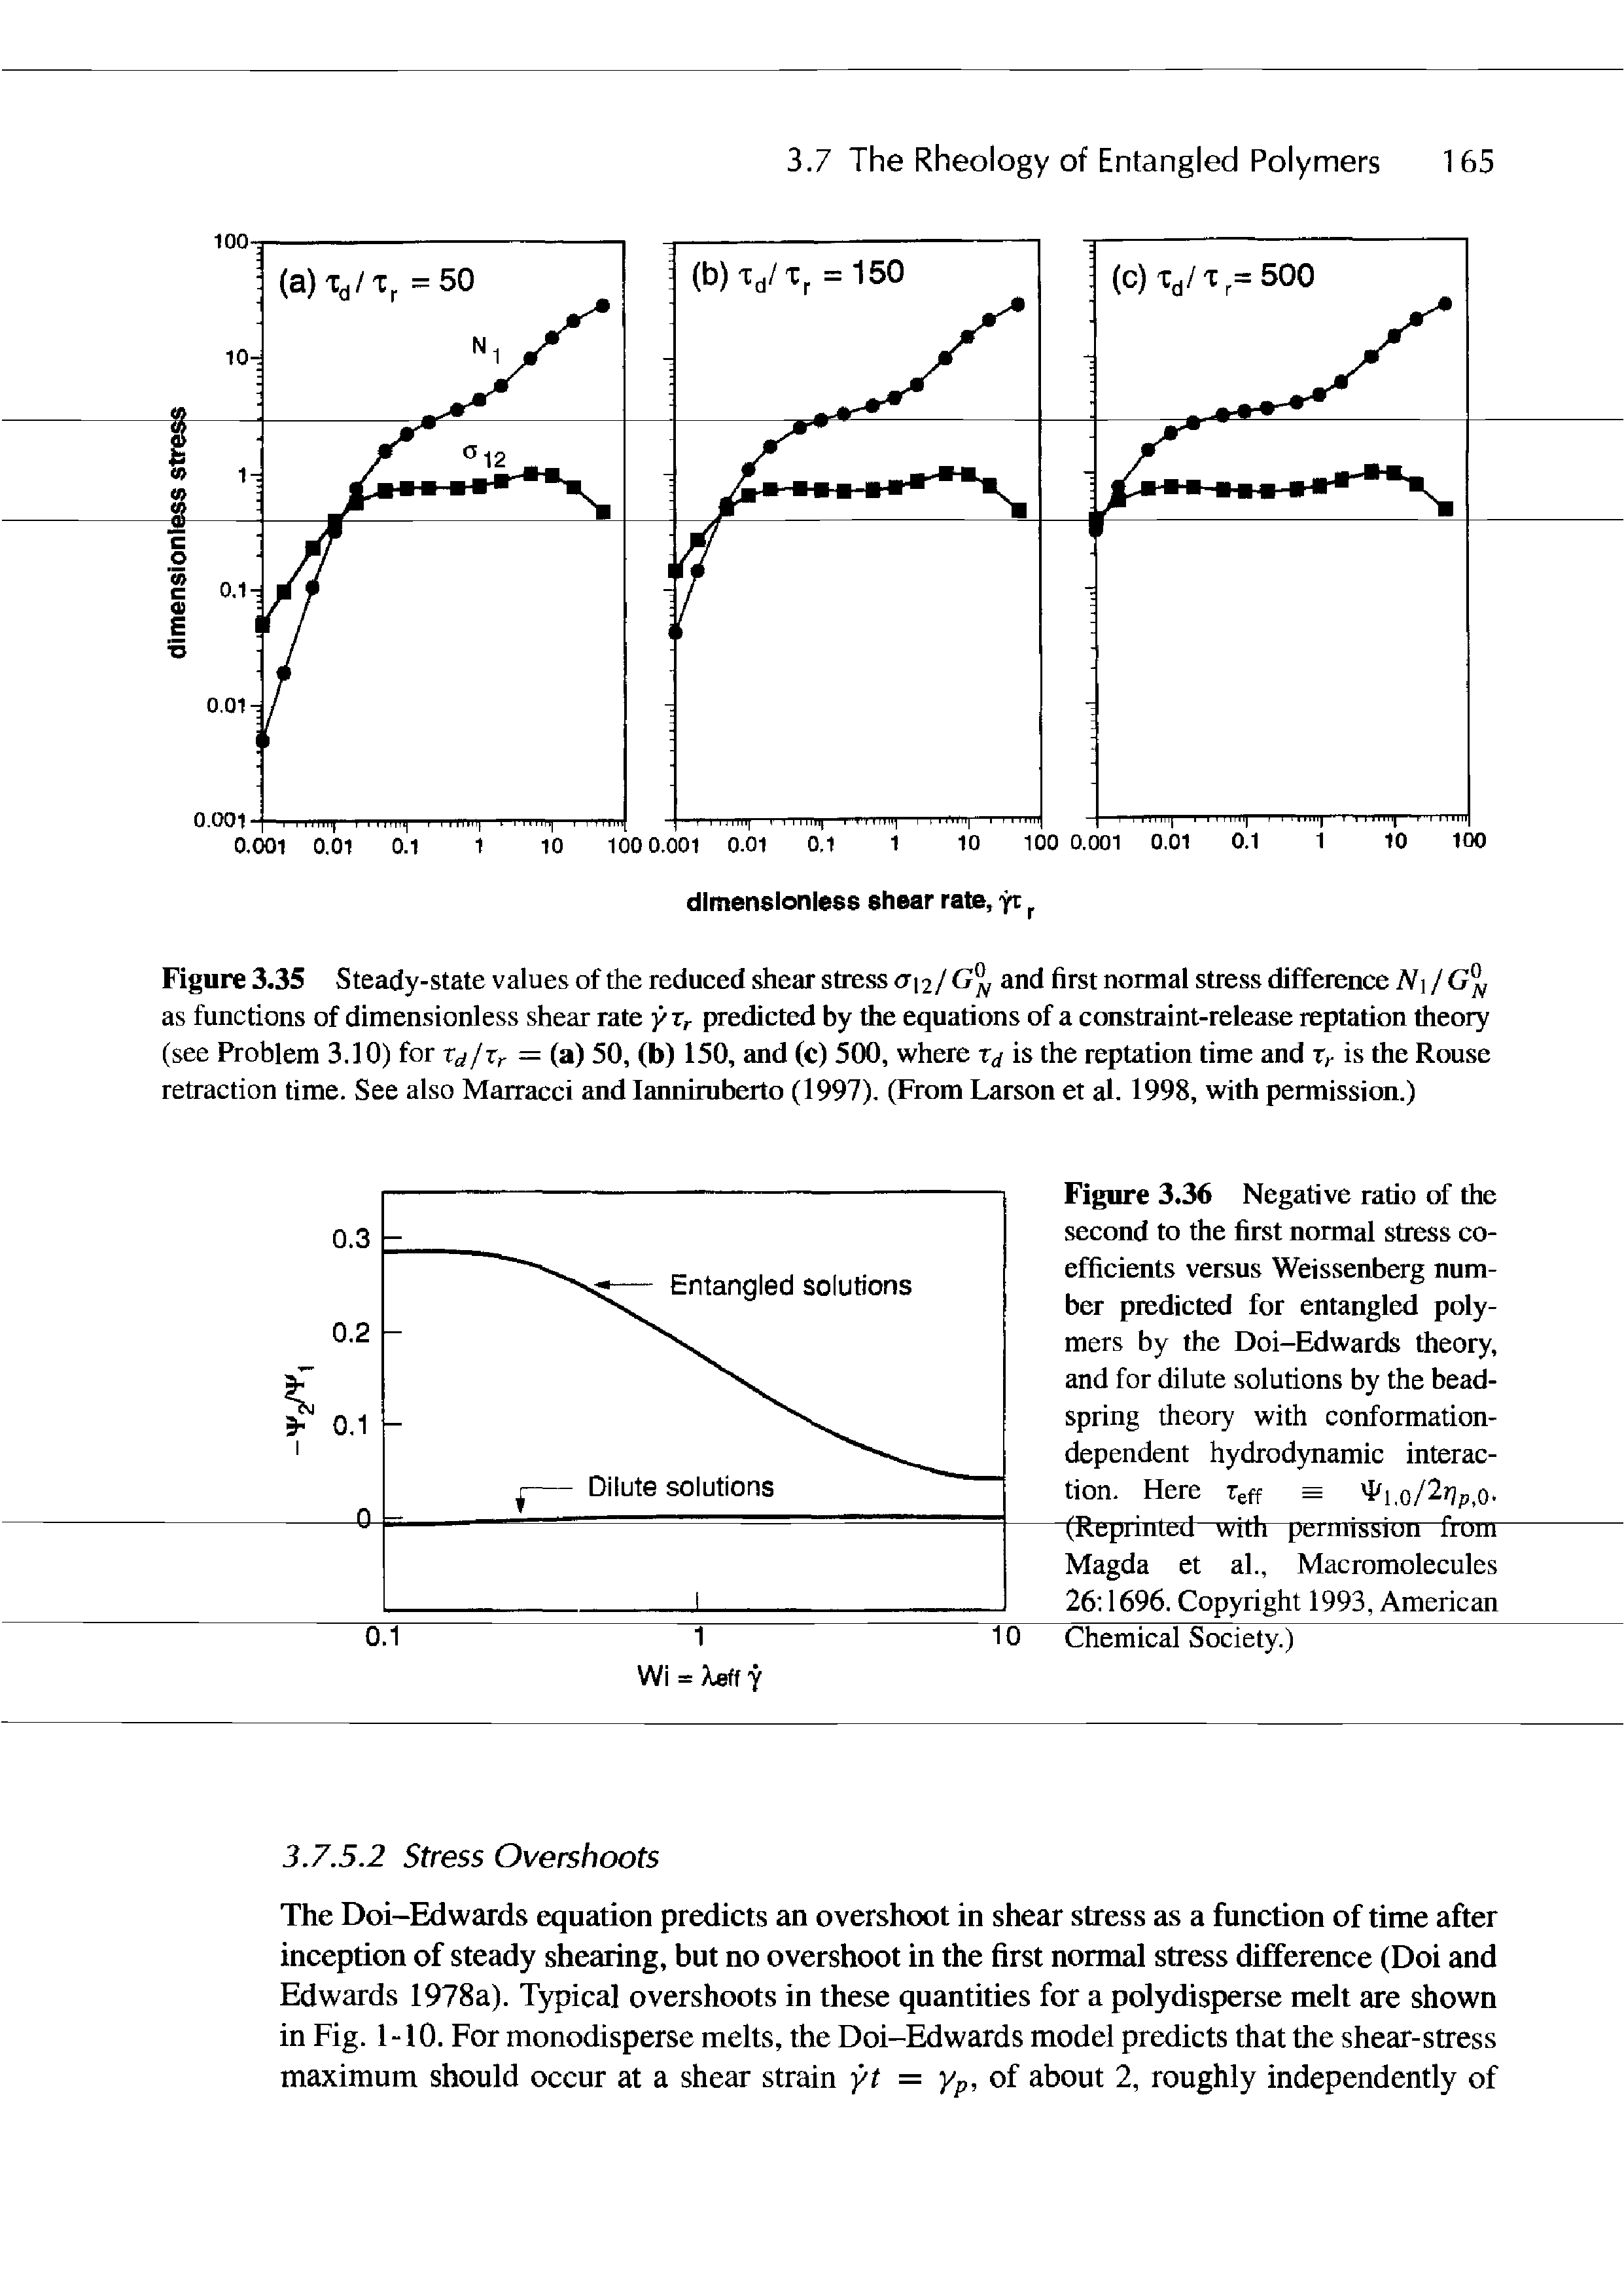 Figure 3.35 Steady-state values of the reduced shear stress <712/ and first normal stress difference N / as functions of dimensionless shear rate y Zr predicted by the equations of a constraint-release reptation theory (see Problem 3.10) for Xd/Zr — (a) 50, (b) 150, and (c) 500, where Zd is the reptation time and Zr is the Rouse retraction time. See also Marracci and lanniruberto (1997). (From Larson et al. 1998, with permission.)...